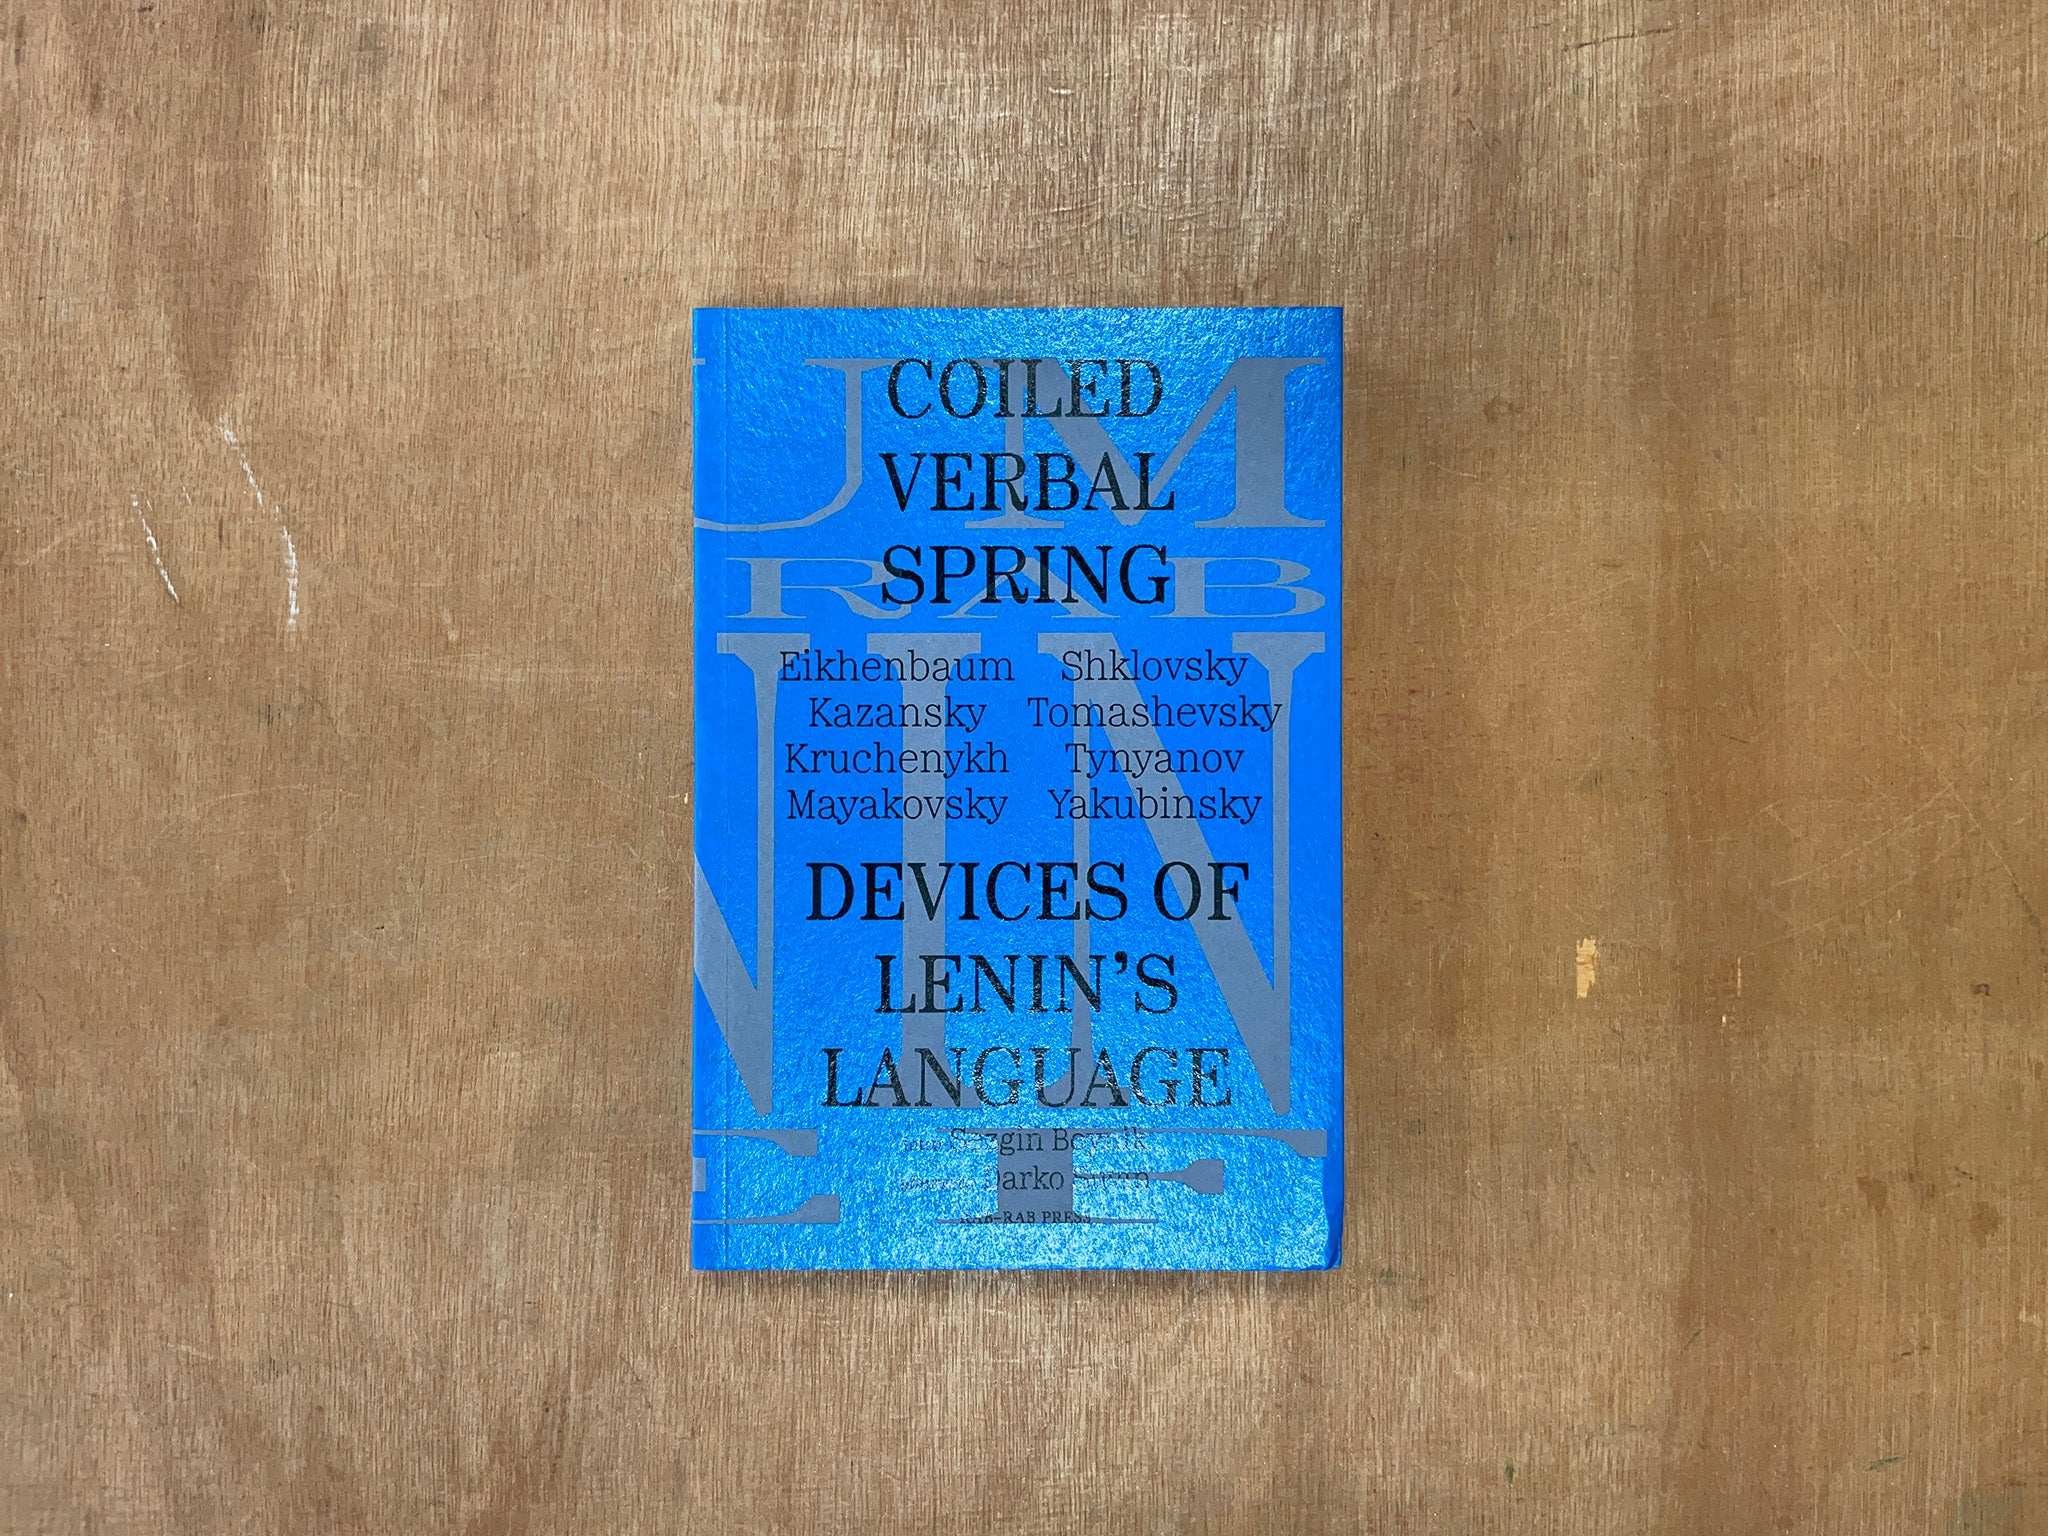 COILED VERBAL SPRING: DEVICES OF LENIN’S LANGUAGE Edited by Sezgin Boynik